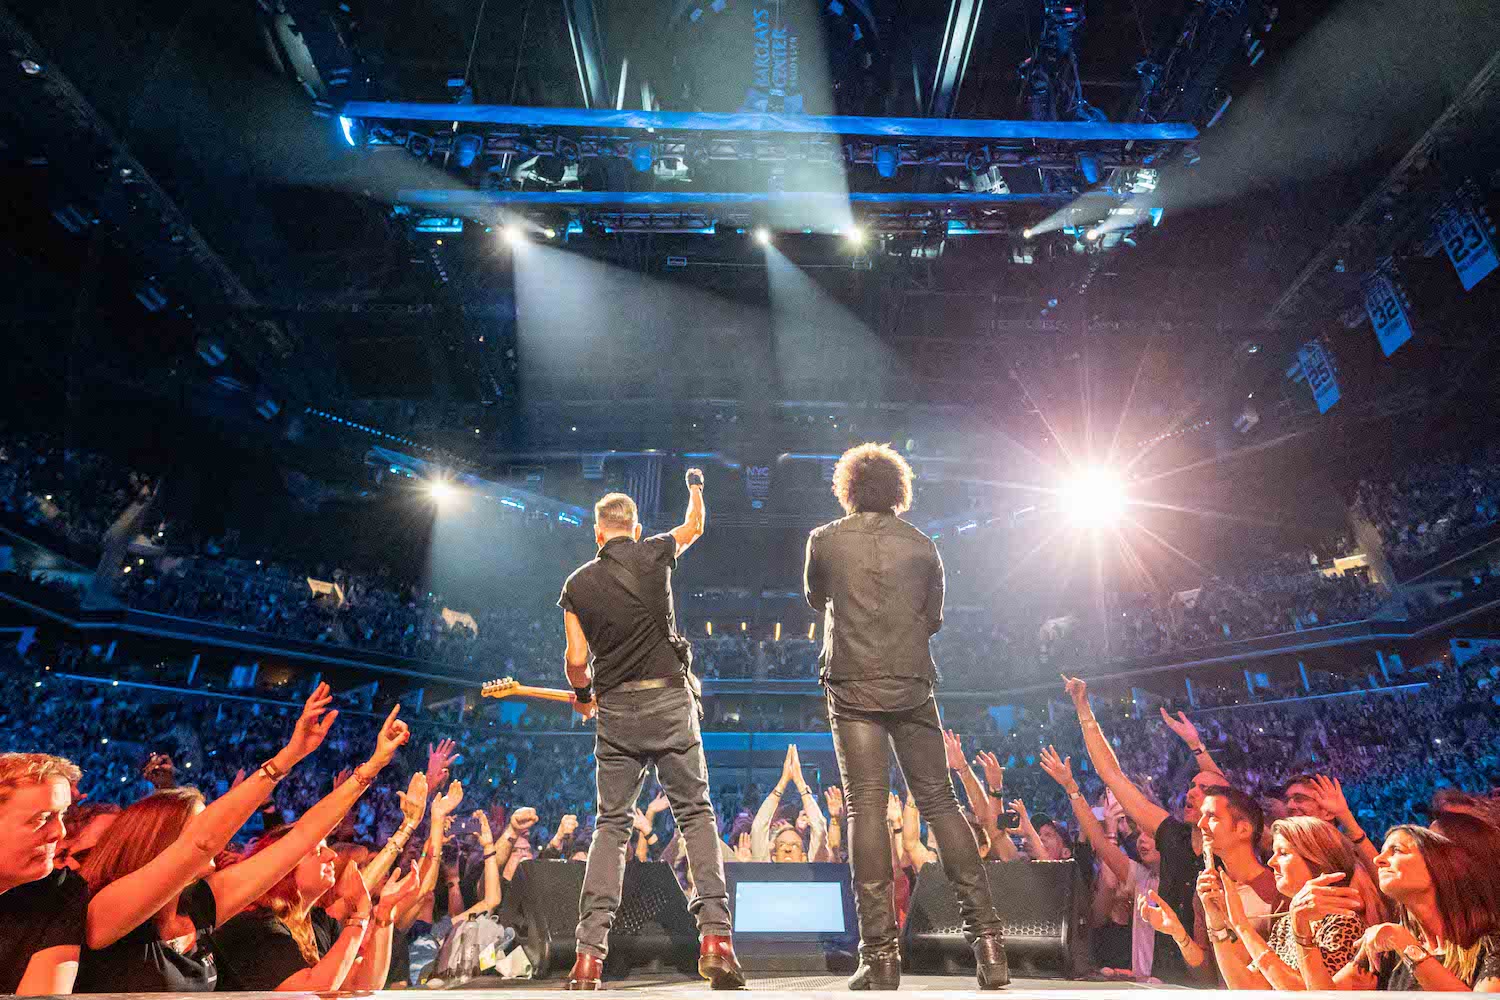 Bruce Springsteen & E Street Band at Barclays Center, Brooklyn, NY on April 3, 2023.